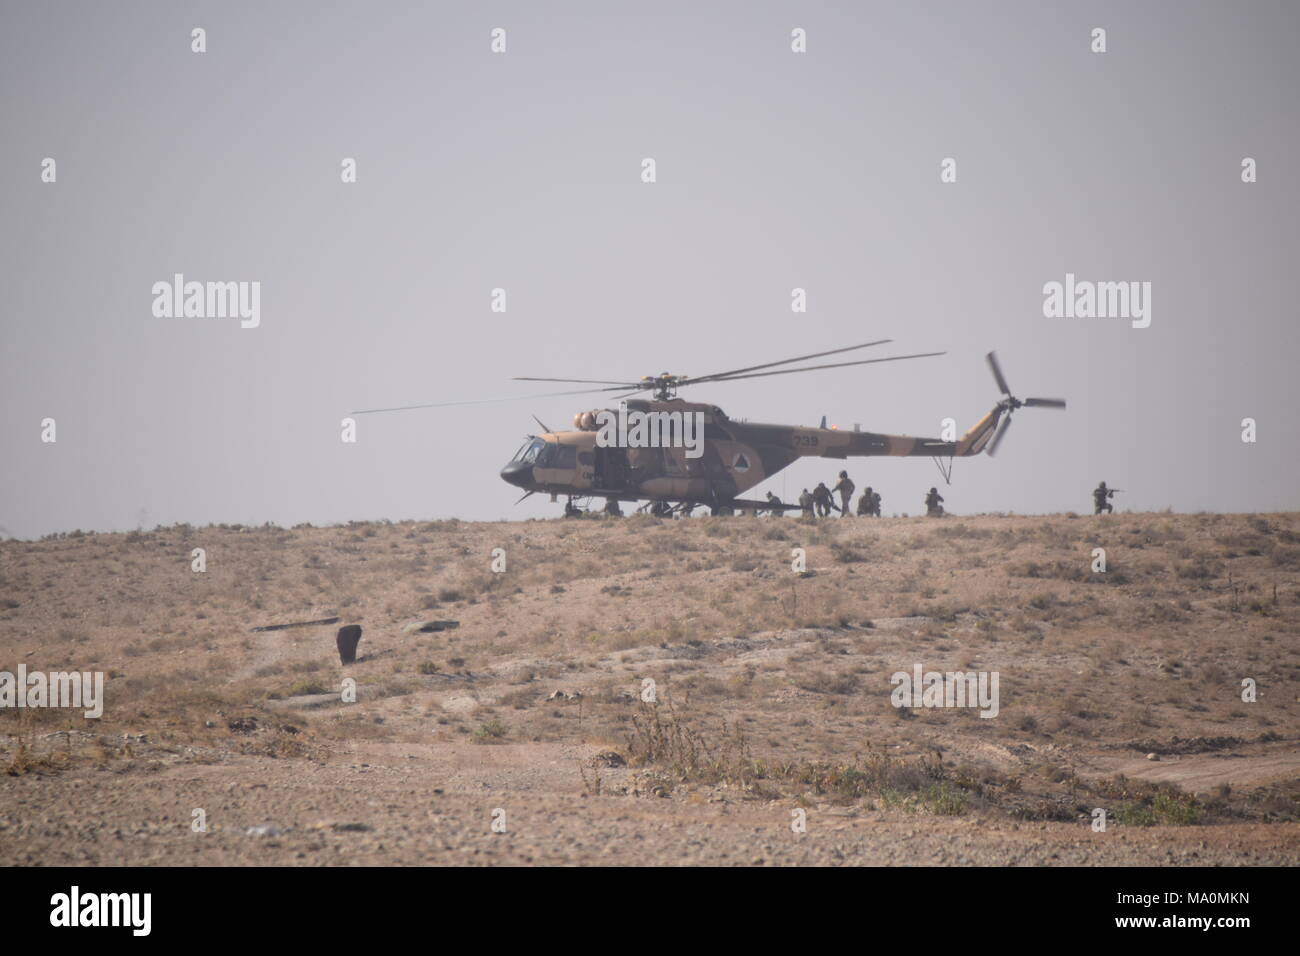 Afghan soldiers disembark from a Mi-17 transport helicopter of the Afghan Air Force during an exercise in the Kabul Military Training Centre (KMTC). Stock Photo